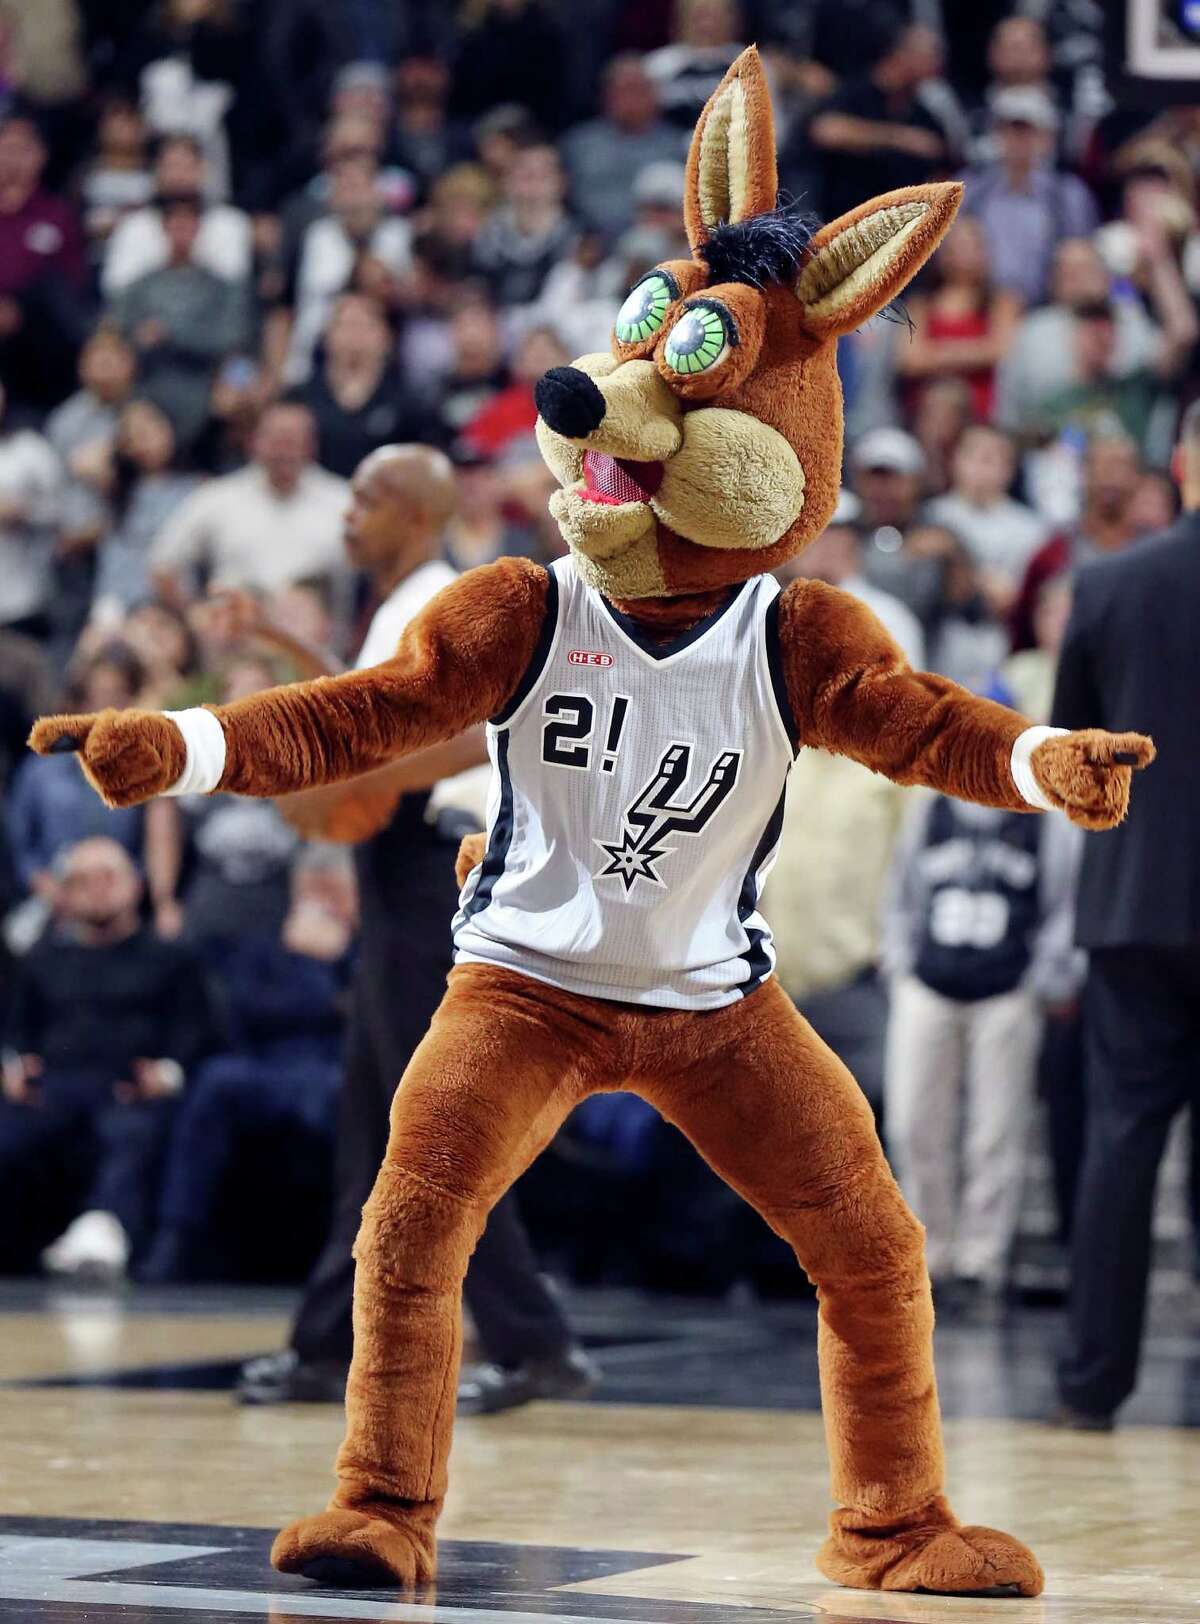 Spurs mascot catches bat during game (VIDEO) - NBC Sports